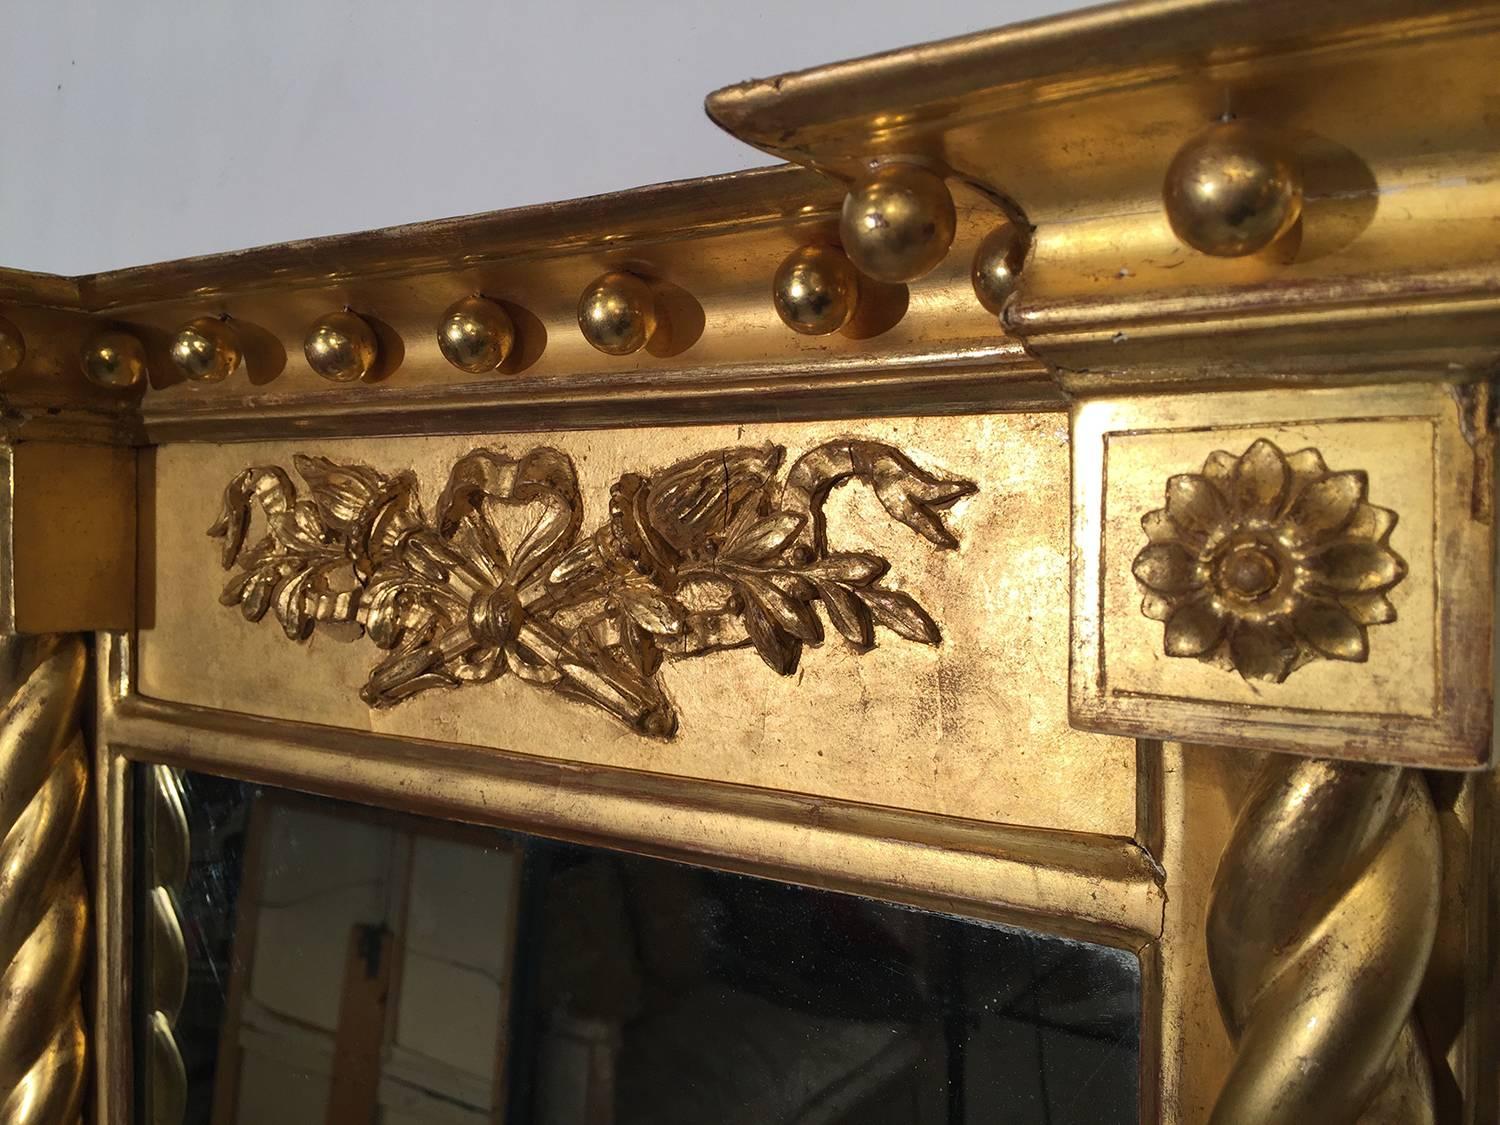 Federal gold gilt mirror with barley twist columns and decorative carving on top, circa 1820-1840. Original wood back.
Dimensions: 22.5 W x 31.5 H.